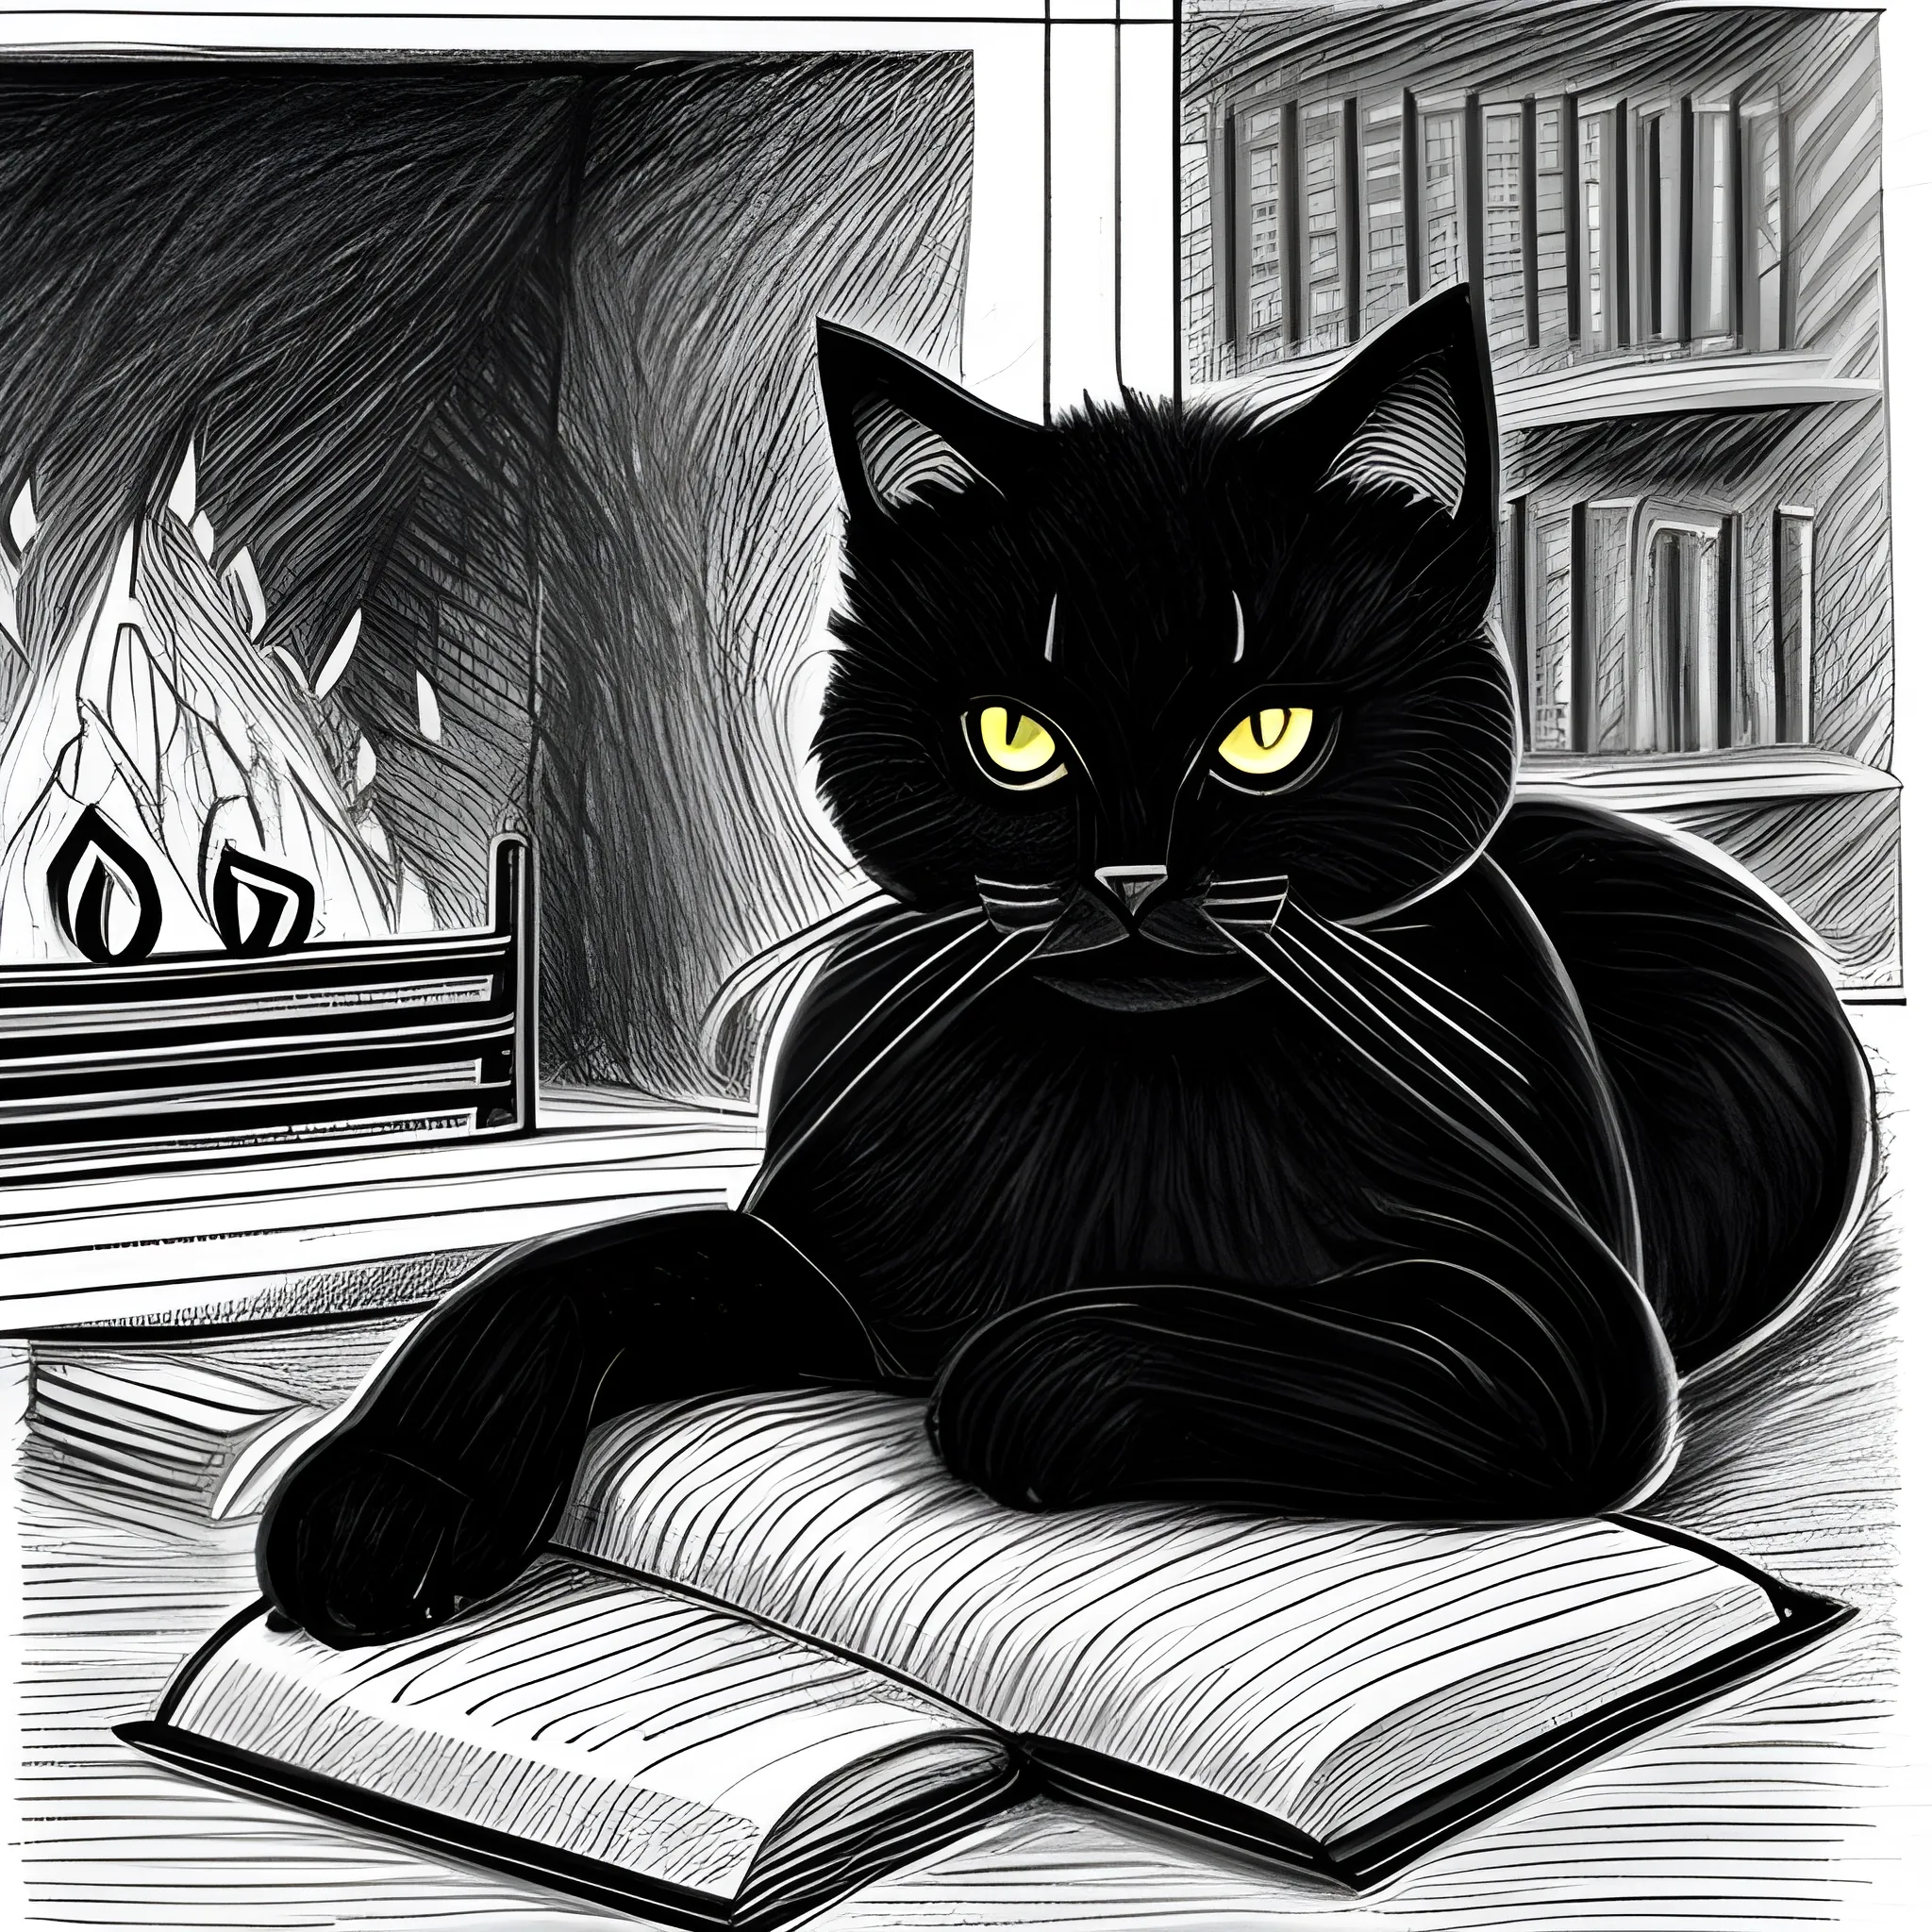 pencil sketch of a black fluffy cat curled up in front of a warm fireplace surrounded by books